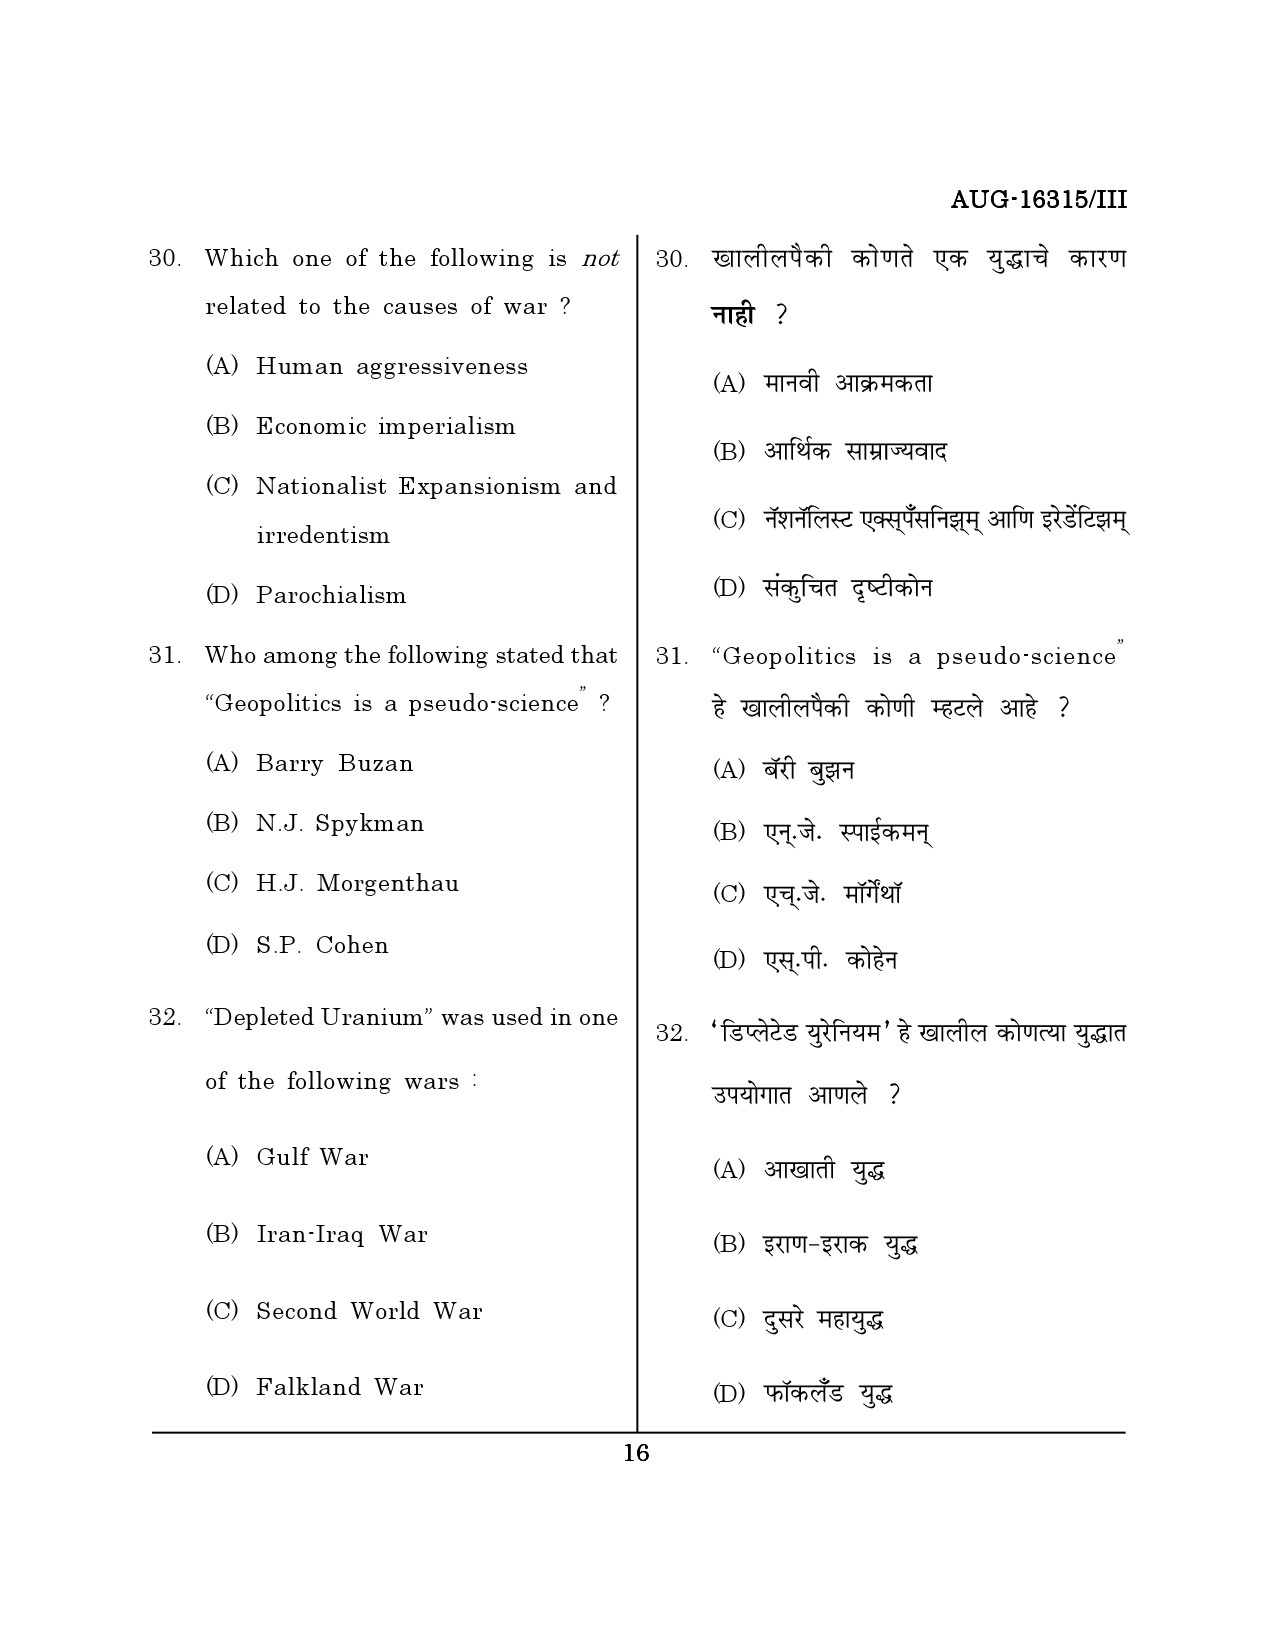 Maharashtra SET Defence and Strategic Studies Question Paper III August 2015 15